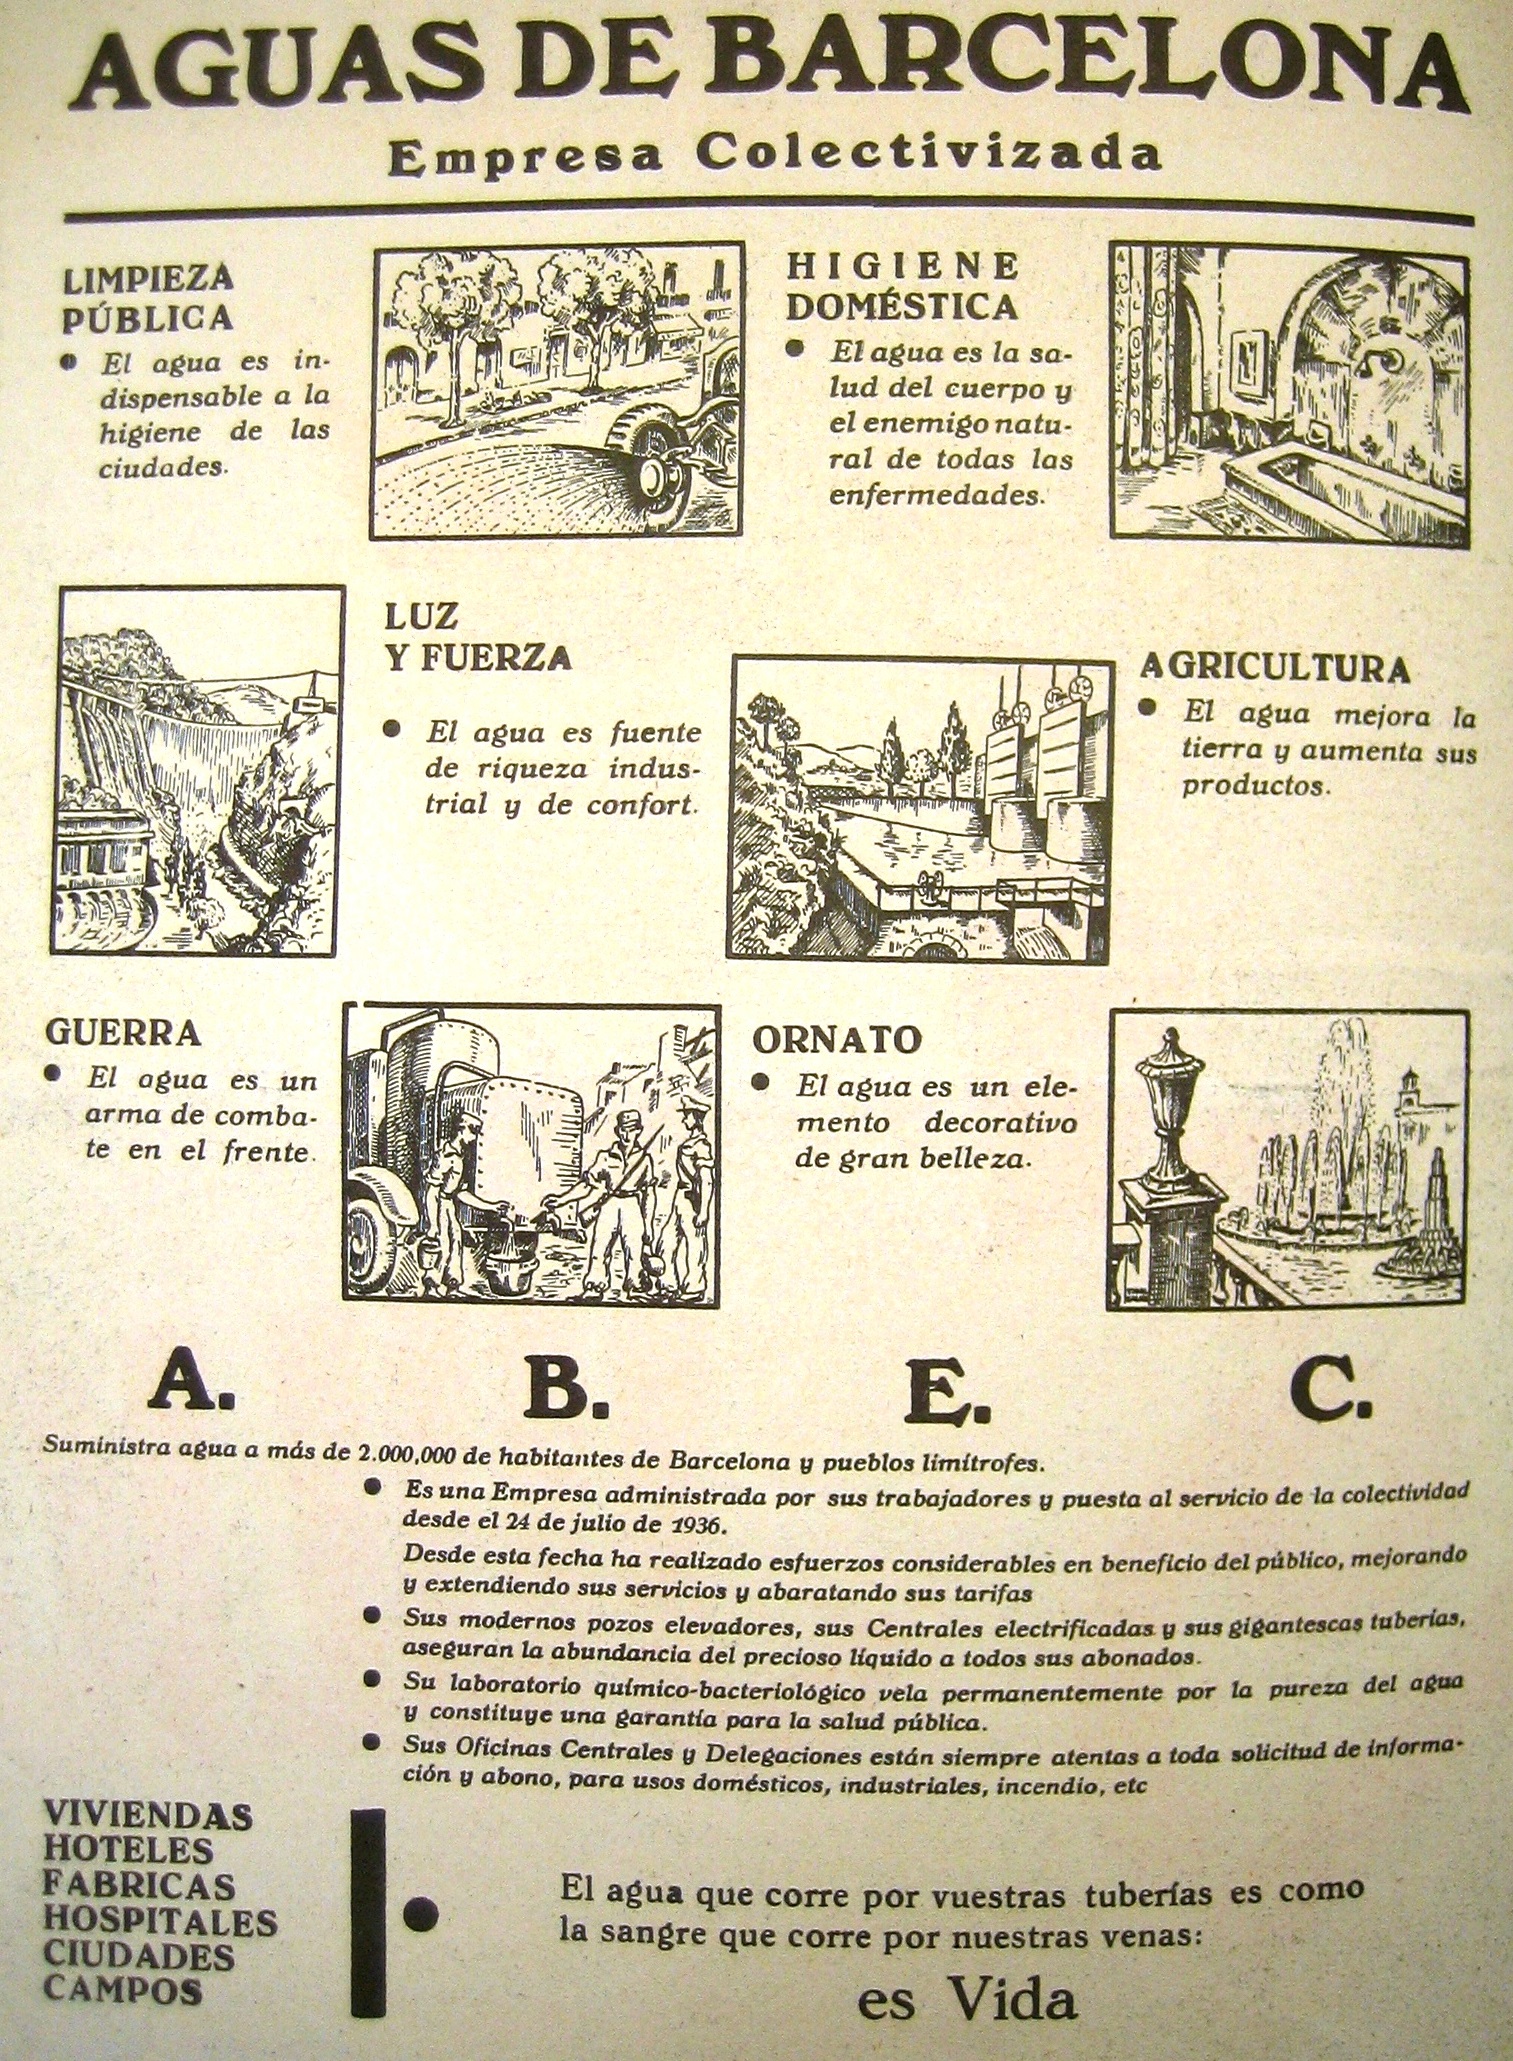 Lessons from the Collectivisation of Aigües de Barcelona during the Spanish Civil War (1936 – 1939)